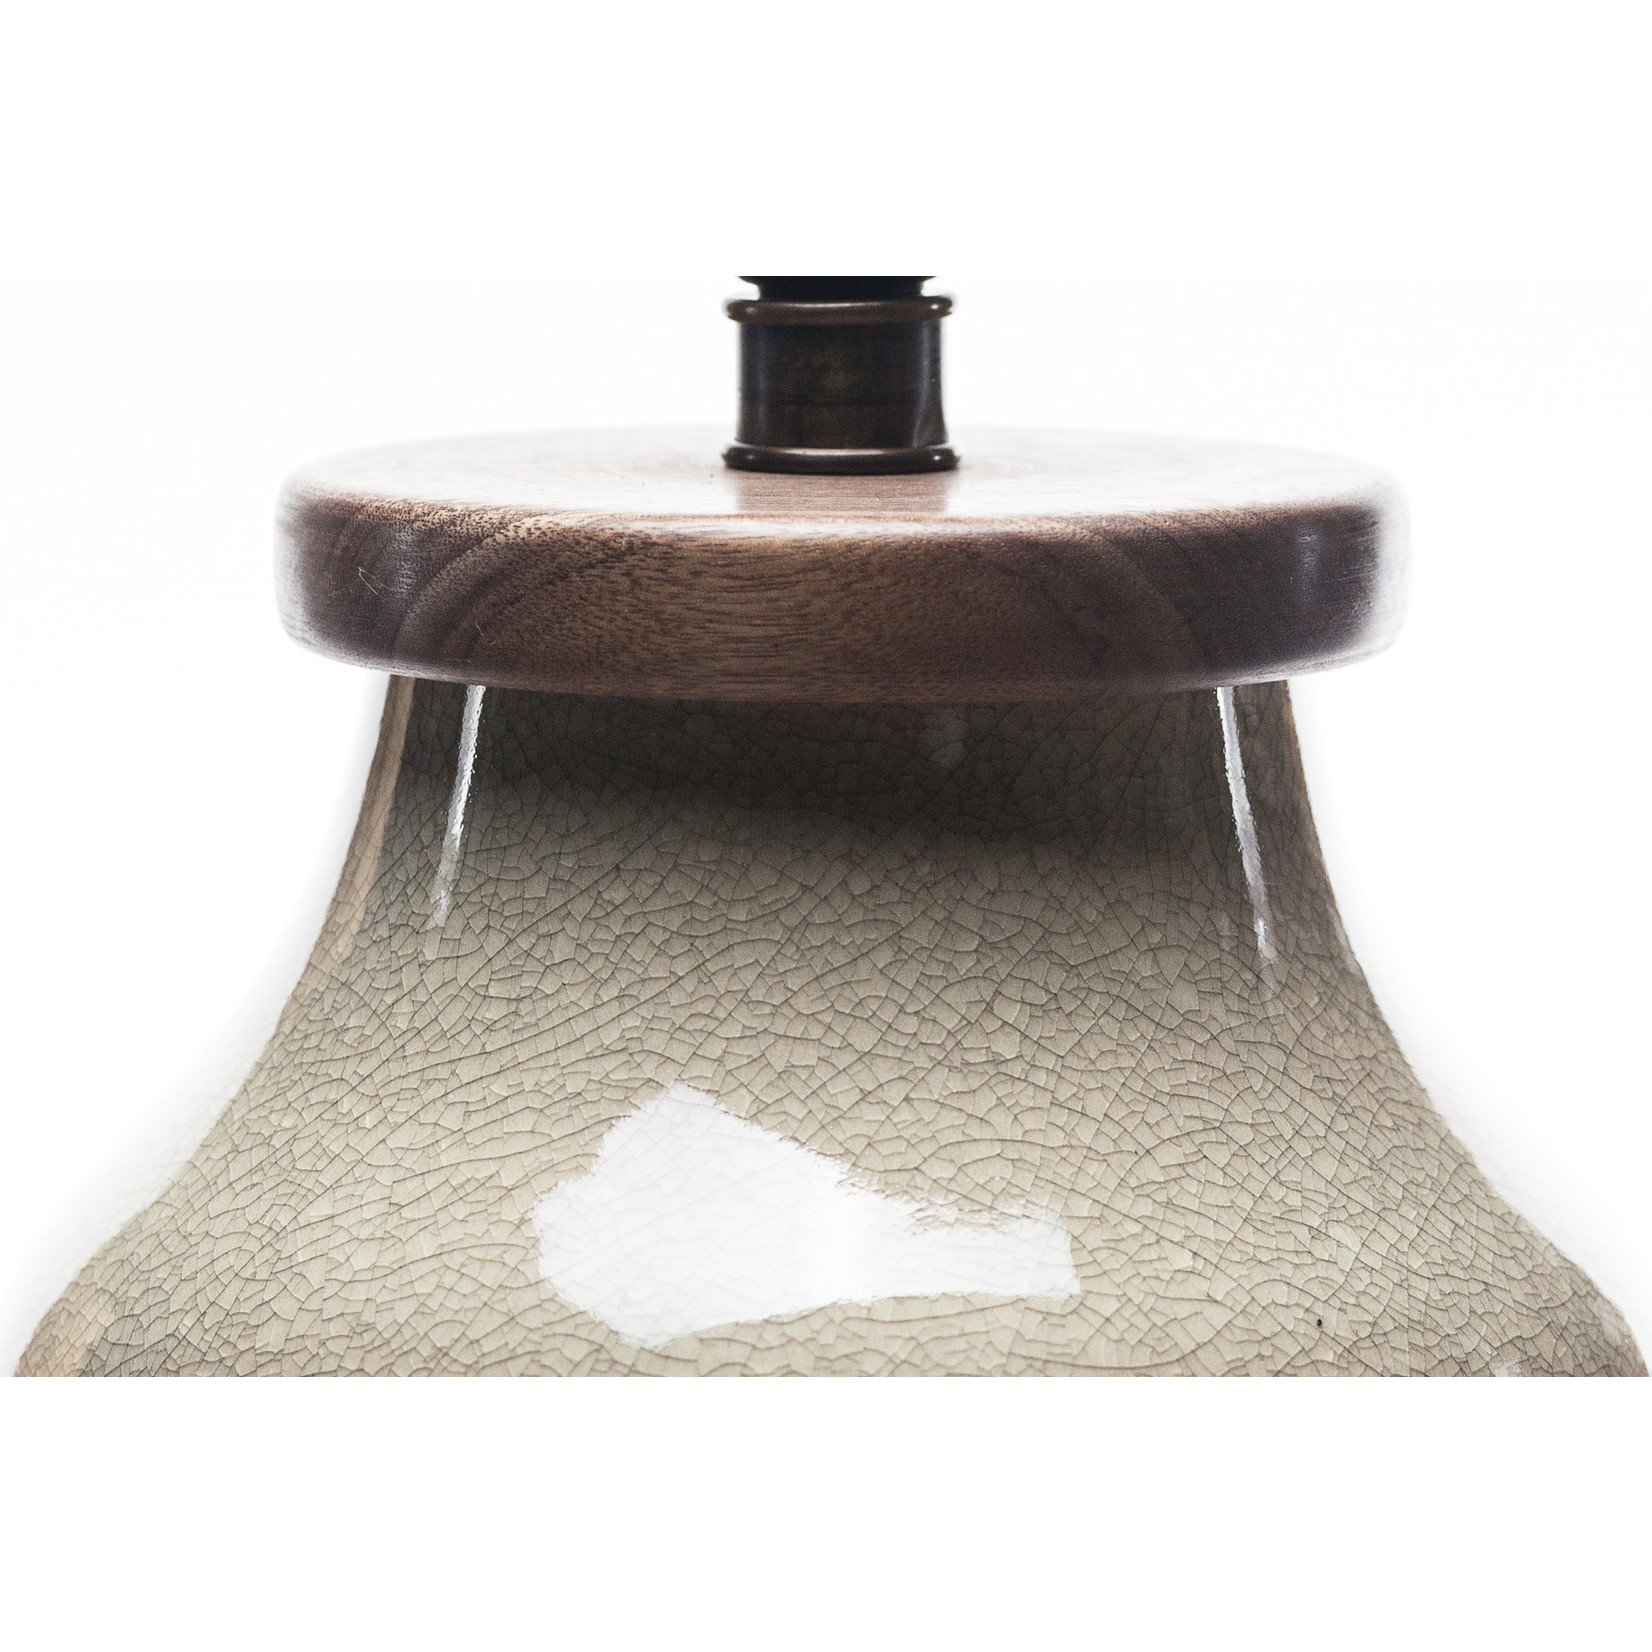 Lawrence & Scott Lagom Porcelain Table Lamp in Oyster Gray Crackle with Walnut Base